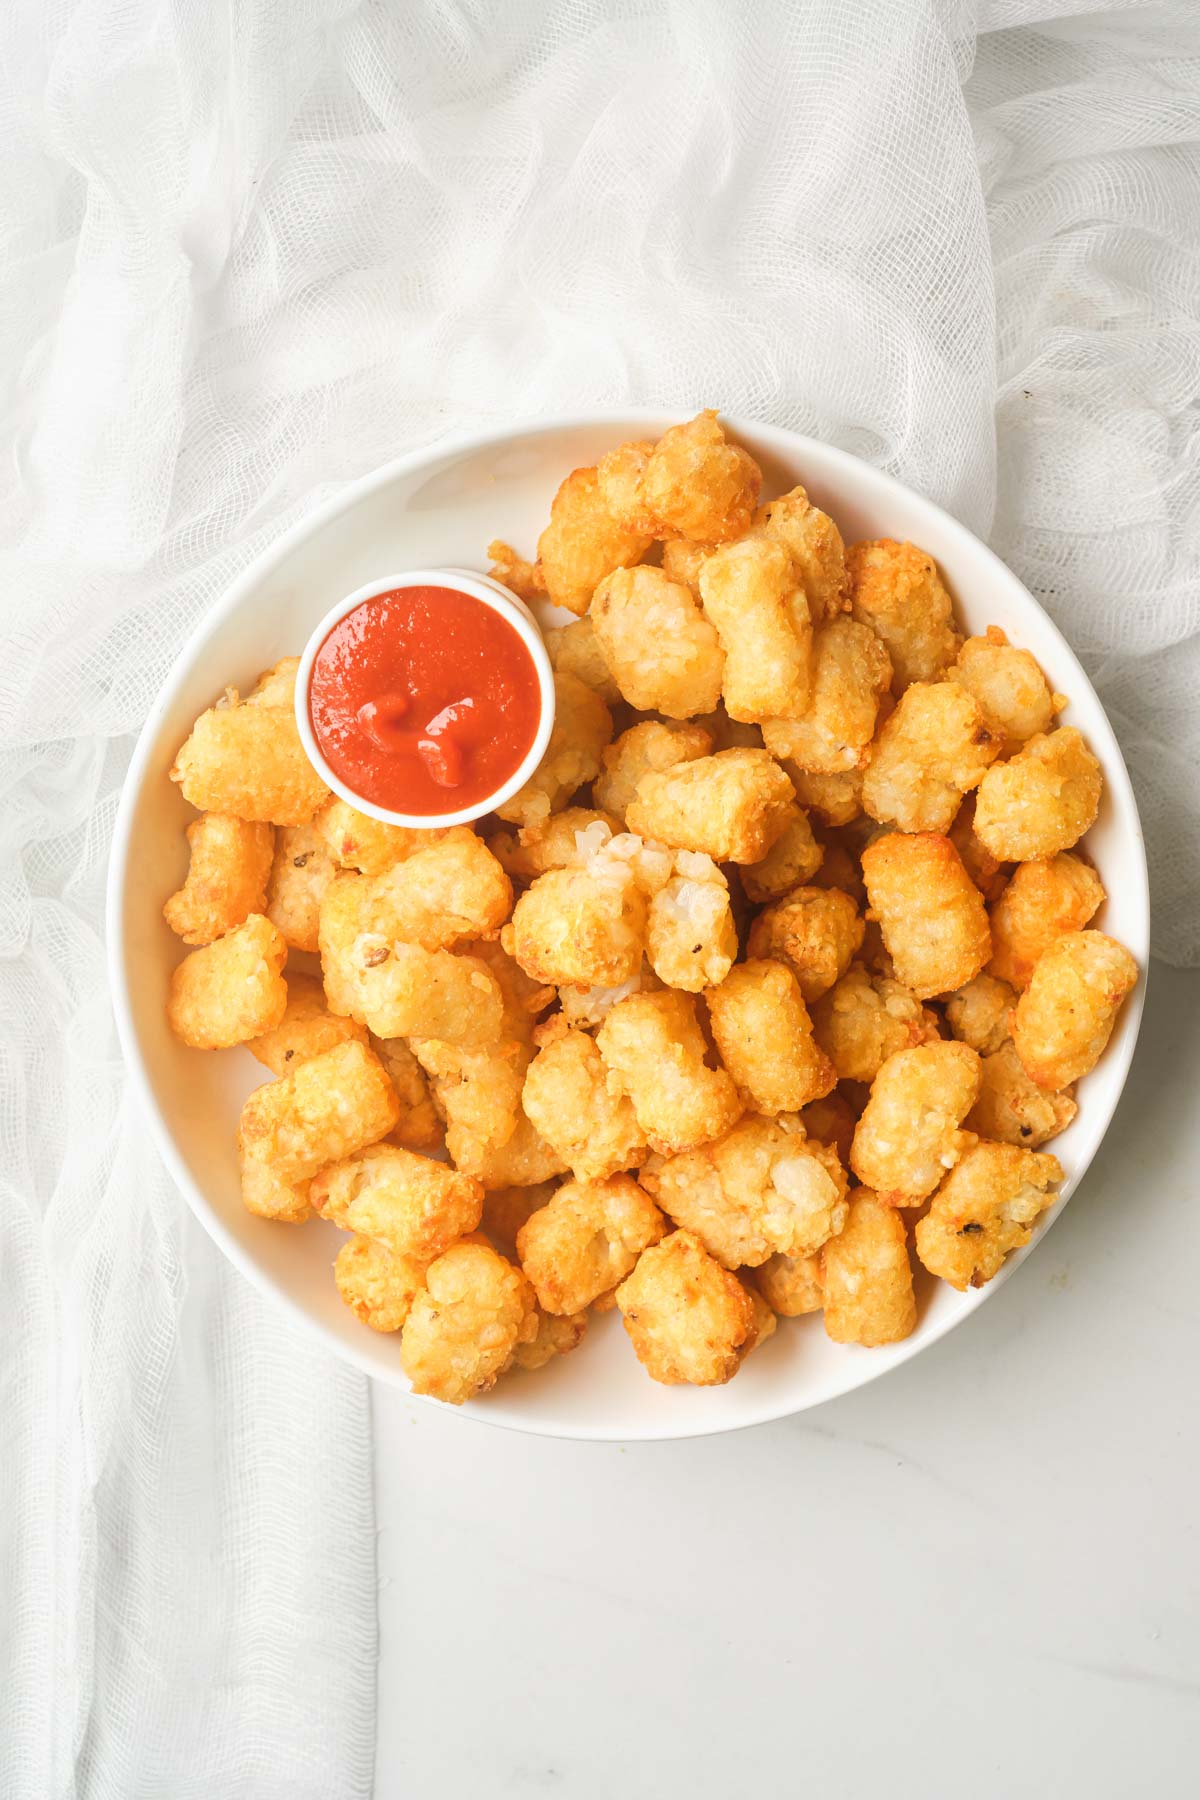 the finished frozen tater tots in air fryer recipe